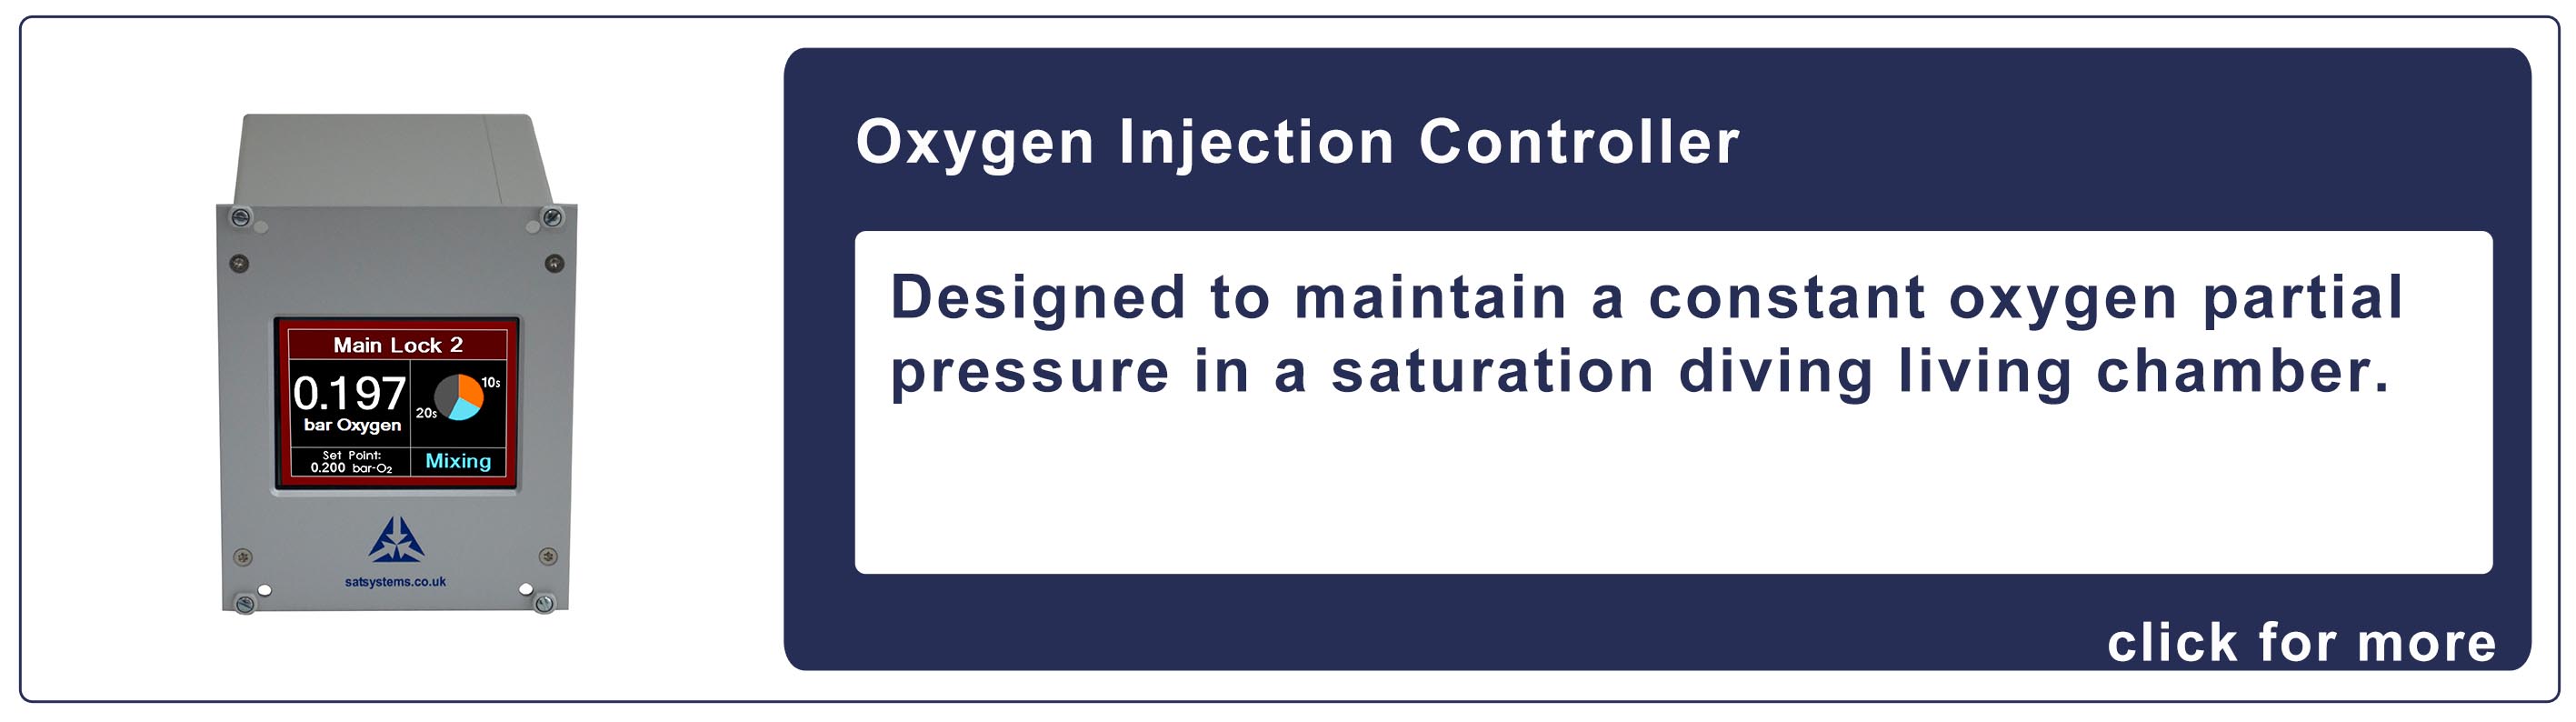 Oxygen Injection Controller